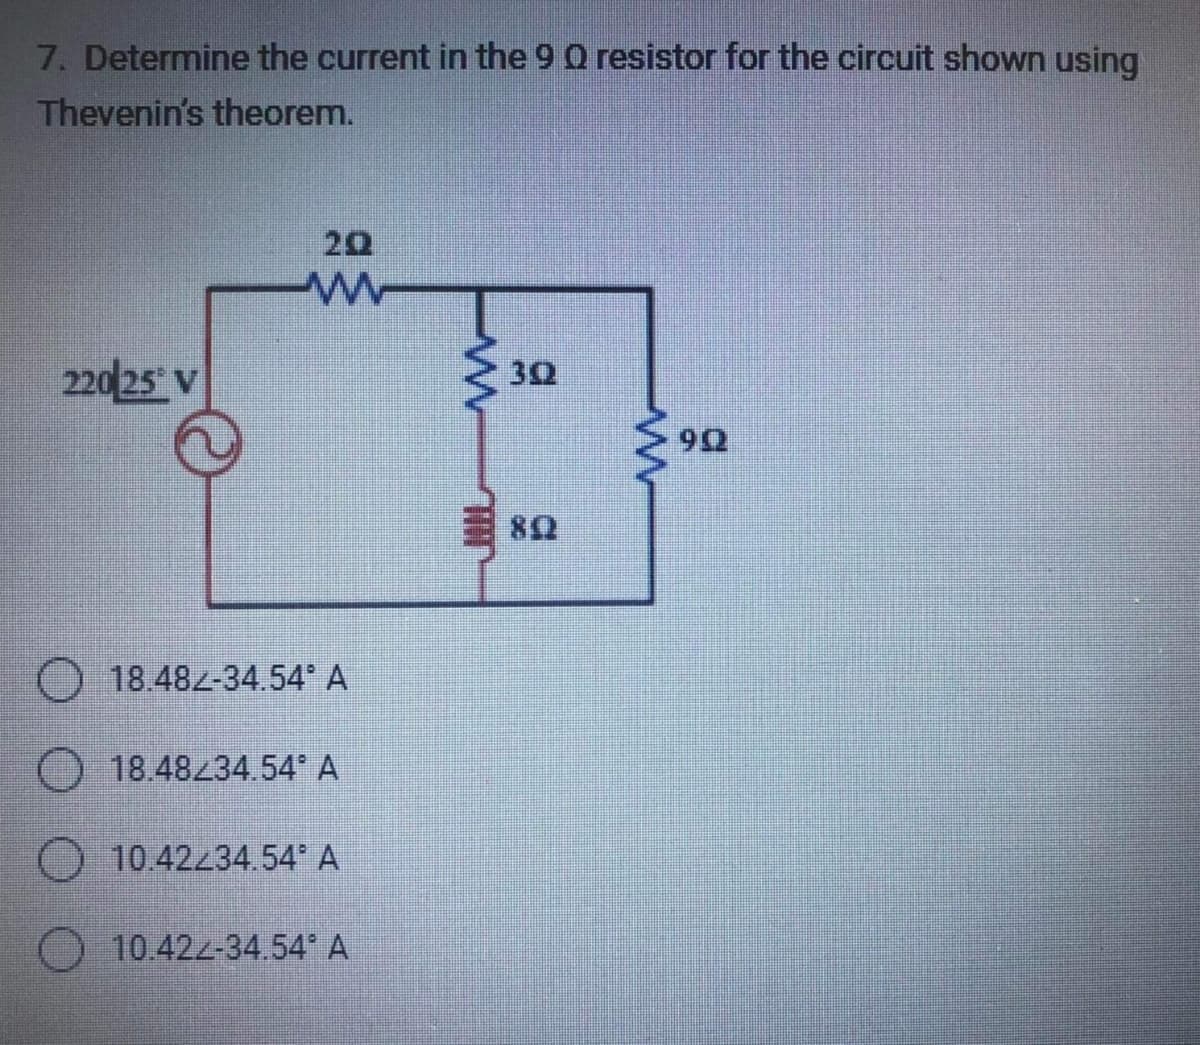 7. Determine the current in the 9 Q resistor for the circuit shown using
Thevenin's theorem.
220 25 V
www
18.482-34.54° A
18.48234.54* A
10.42234.54* A
10.422-34.54* A
www
TIT
302
w
90